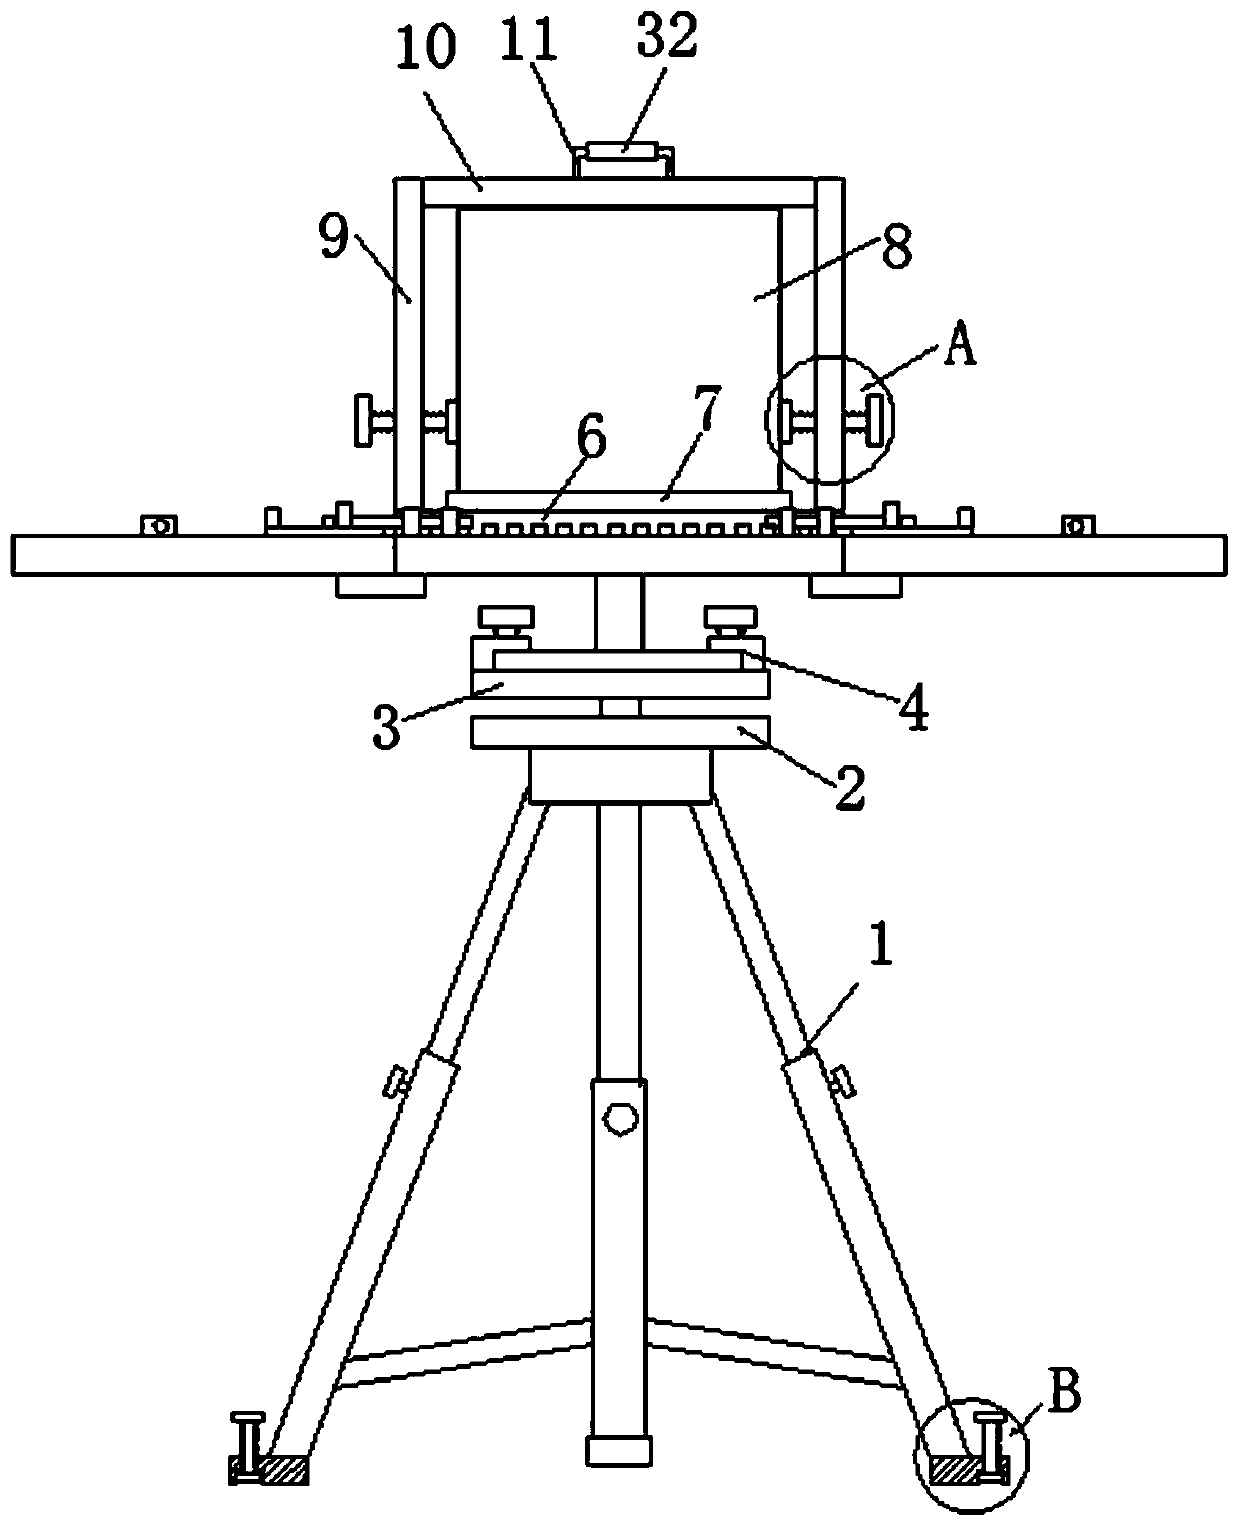 Surveying and mapping device for construction engineering field